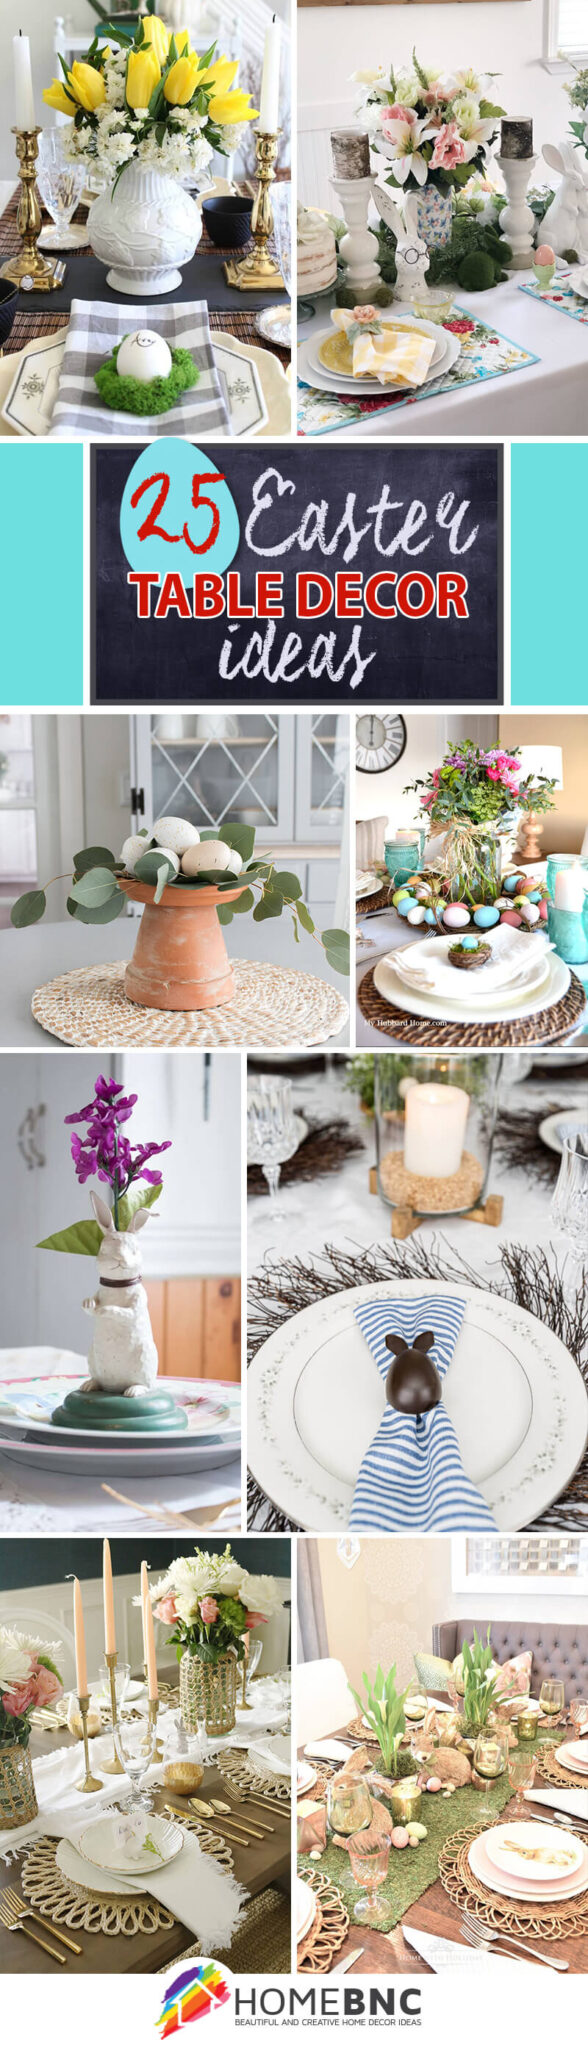 Easter Table Decorations Ideas Pinterest Share Homebnc 588x2048 